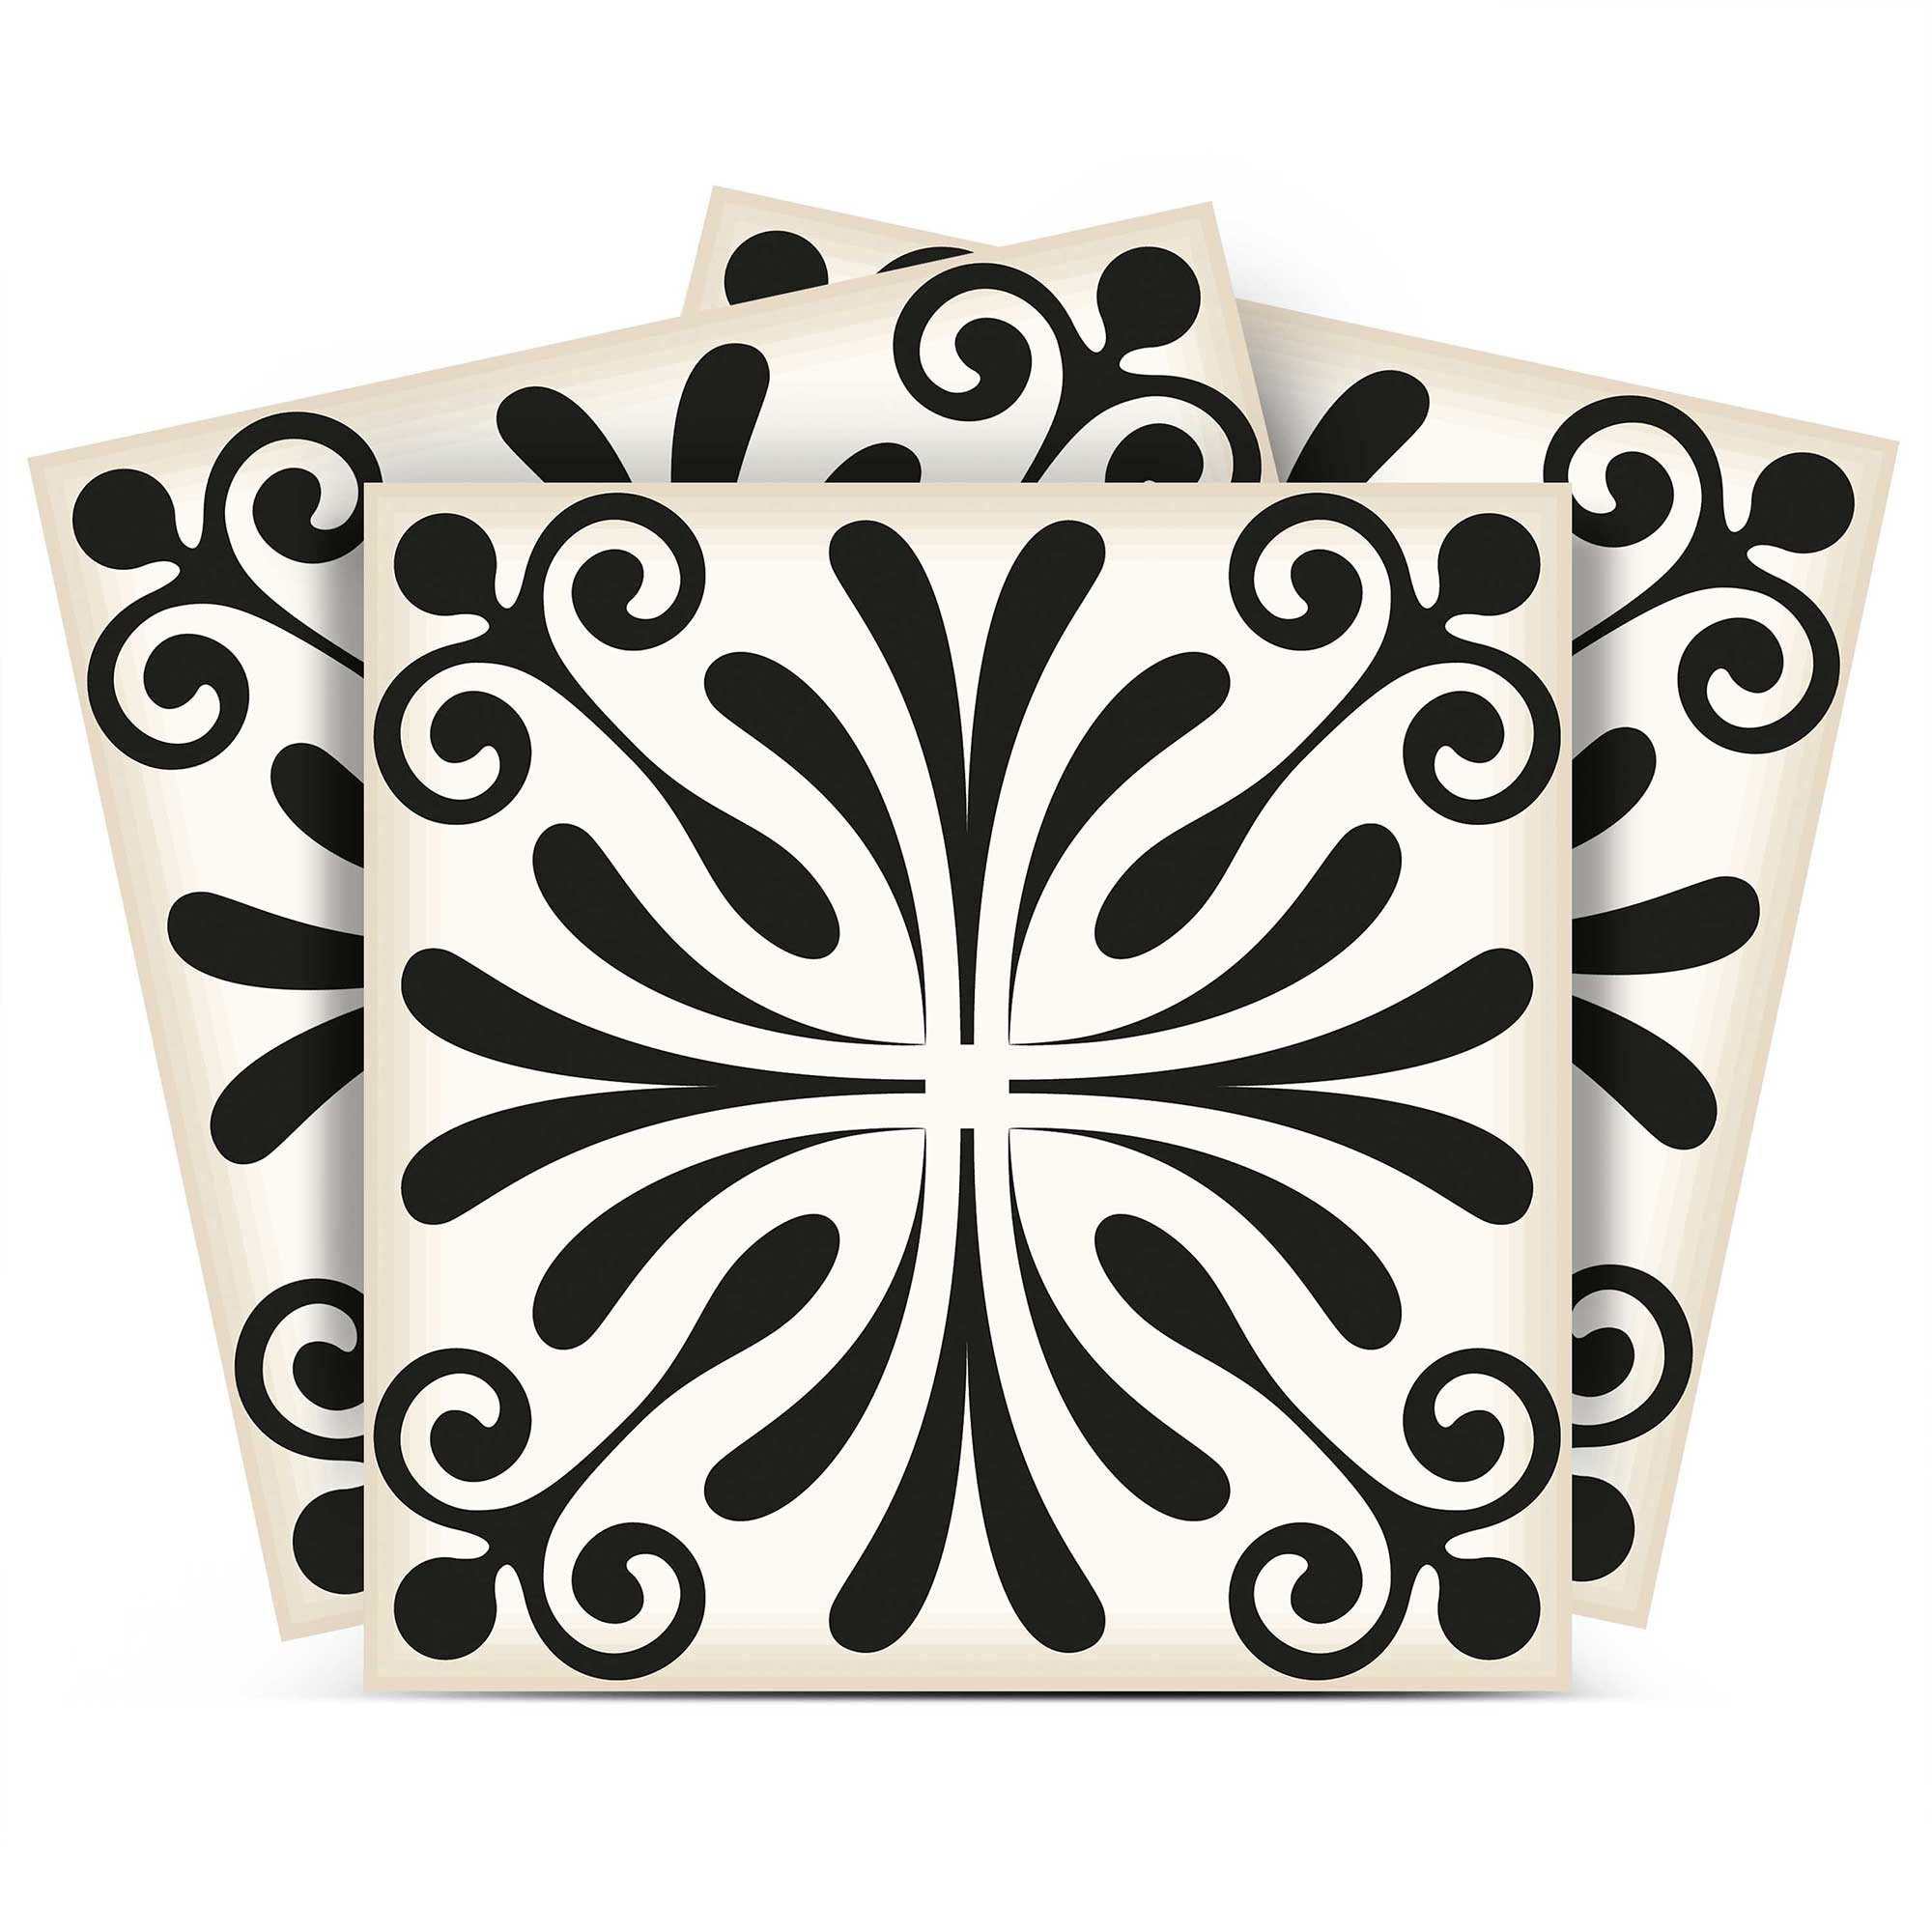 5" X 5" Black and White Flo Peel and Stick Removable Tiles-399951-1